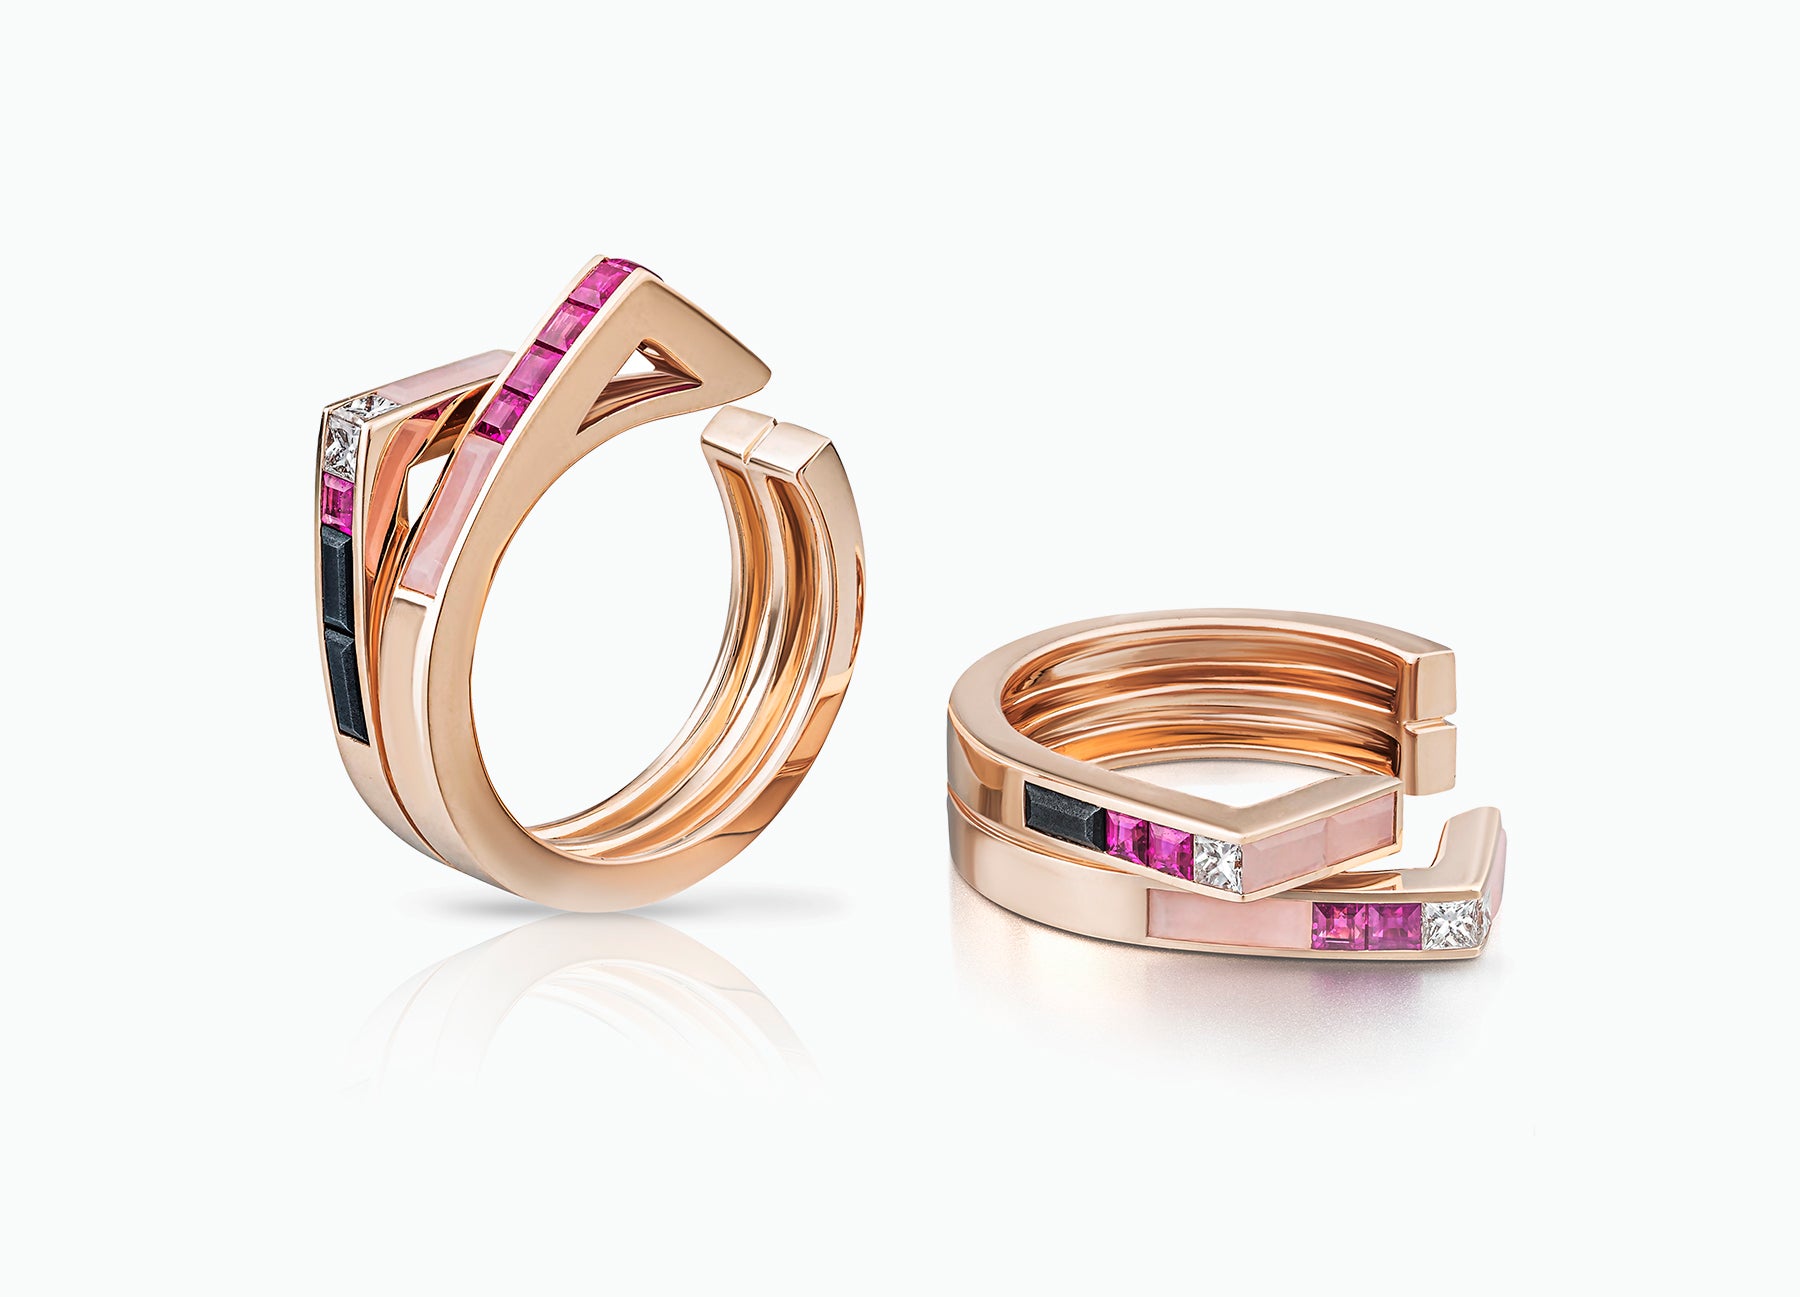 Stellar Pair of Stacking rings in 18K rose gold set with rubies and diamonds and pink opal by Tomasz Donocik Seen apart